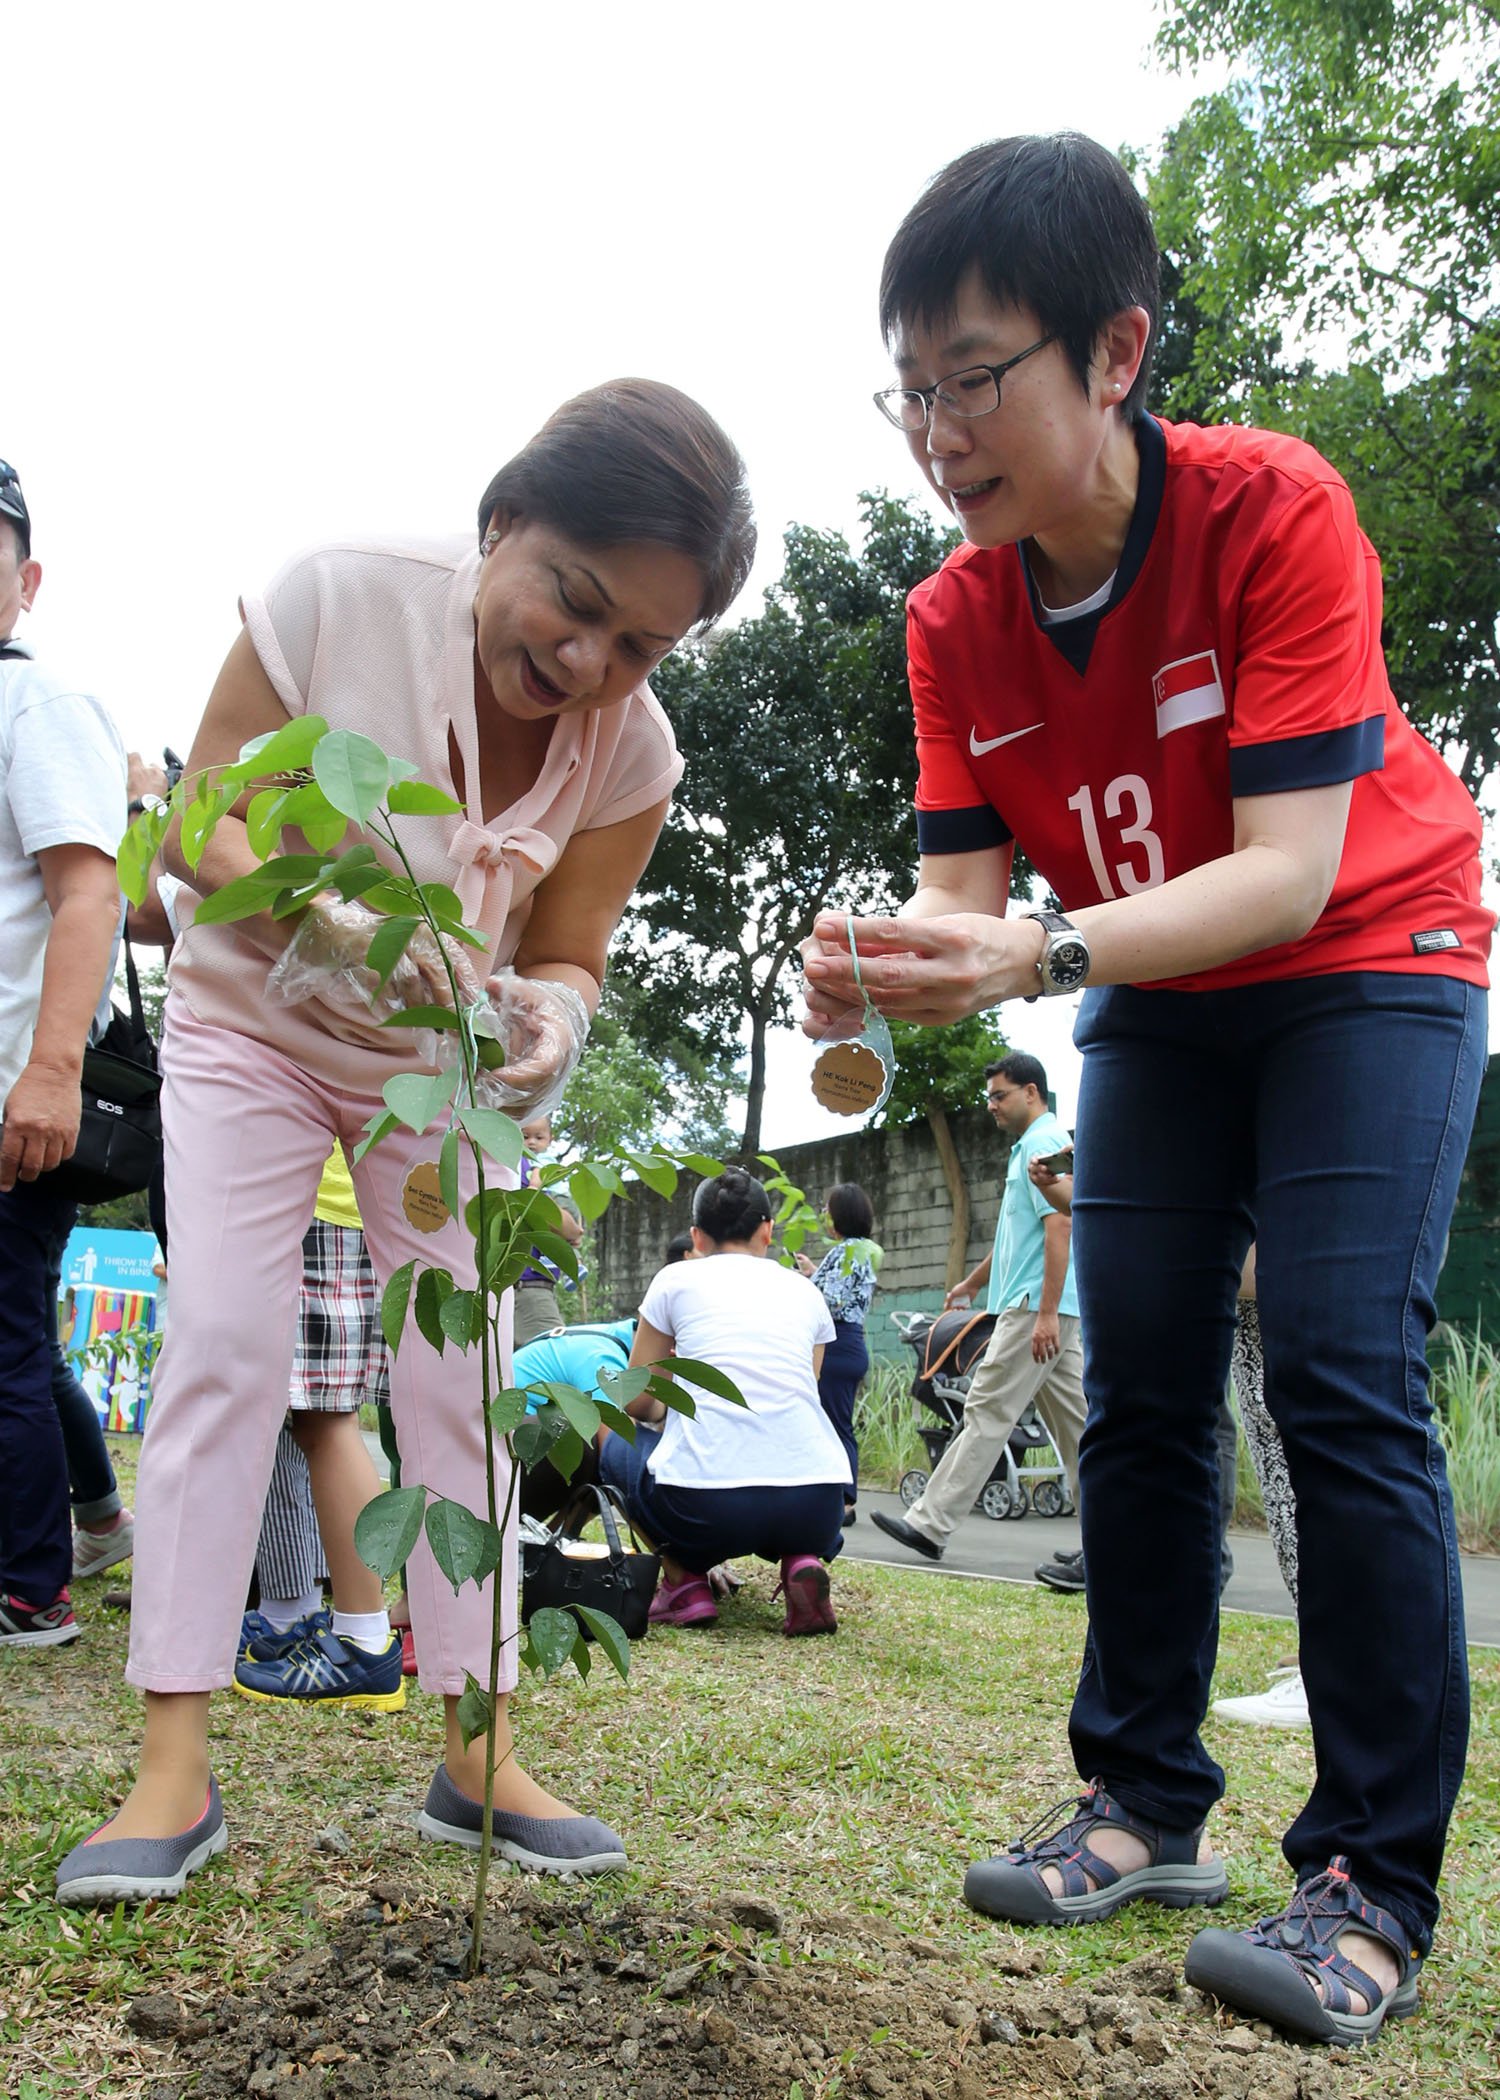 Caring for "Mother Home" by planting trees